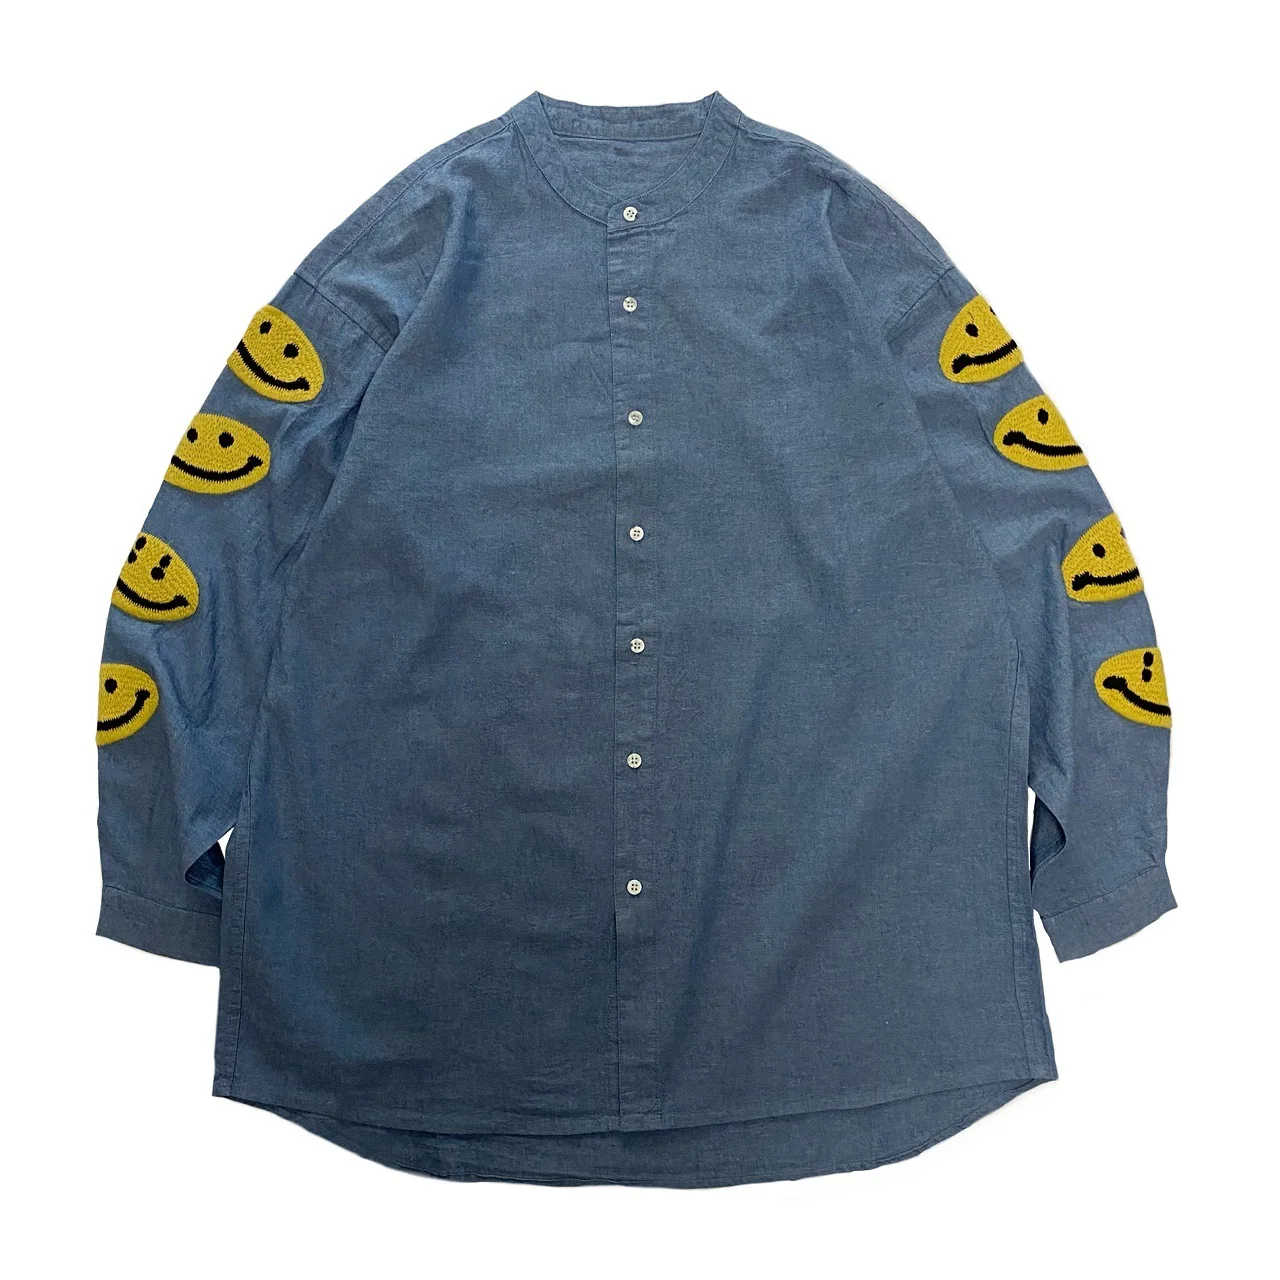 Kapital Vintage Japanese Heavy Industry Smiley Face Embroidery Men and Women Loose Printed Denim Shirt Coat Casual